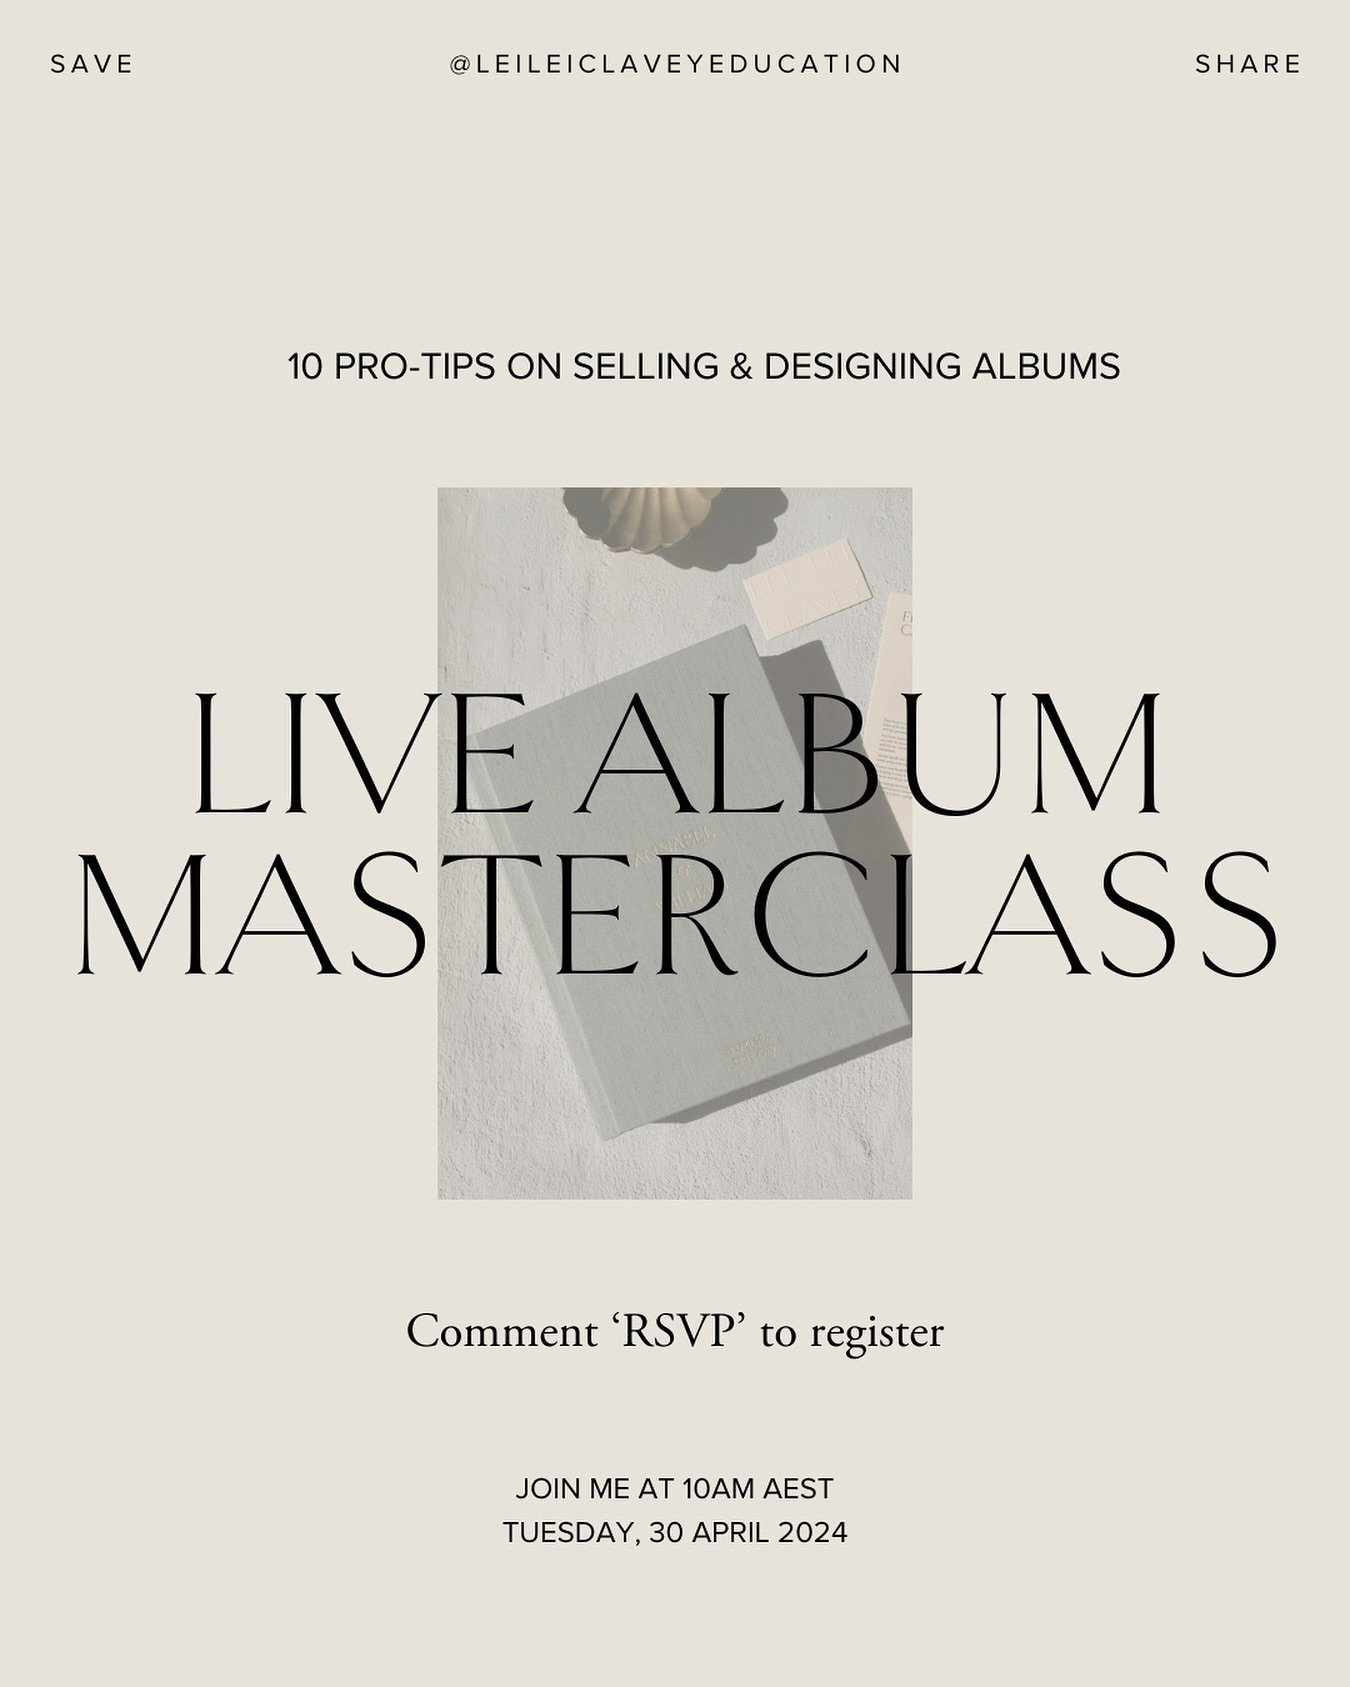 **Live Album Masterclass** 

SAVE THE DATE: 10am AEST on Tuesday, 30 April

Next week I&rsquo;m running a live masterclass to kick off the launch on my new online course The Art of Selling Albums. 

Here&rsquo;s what I&rsquo;ll be covering in the onl